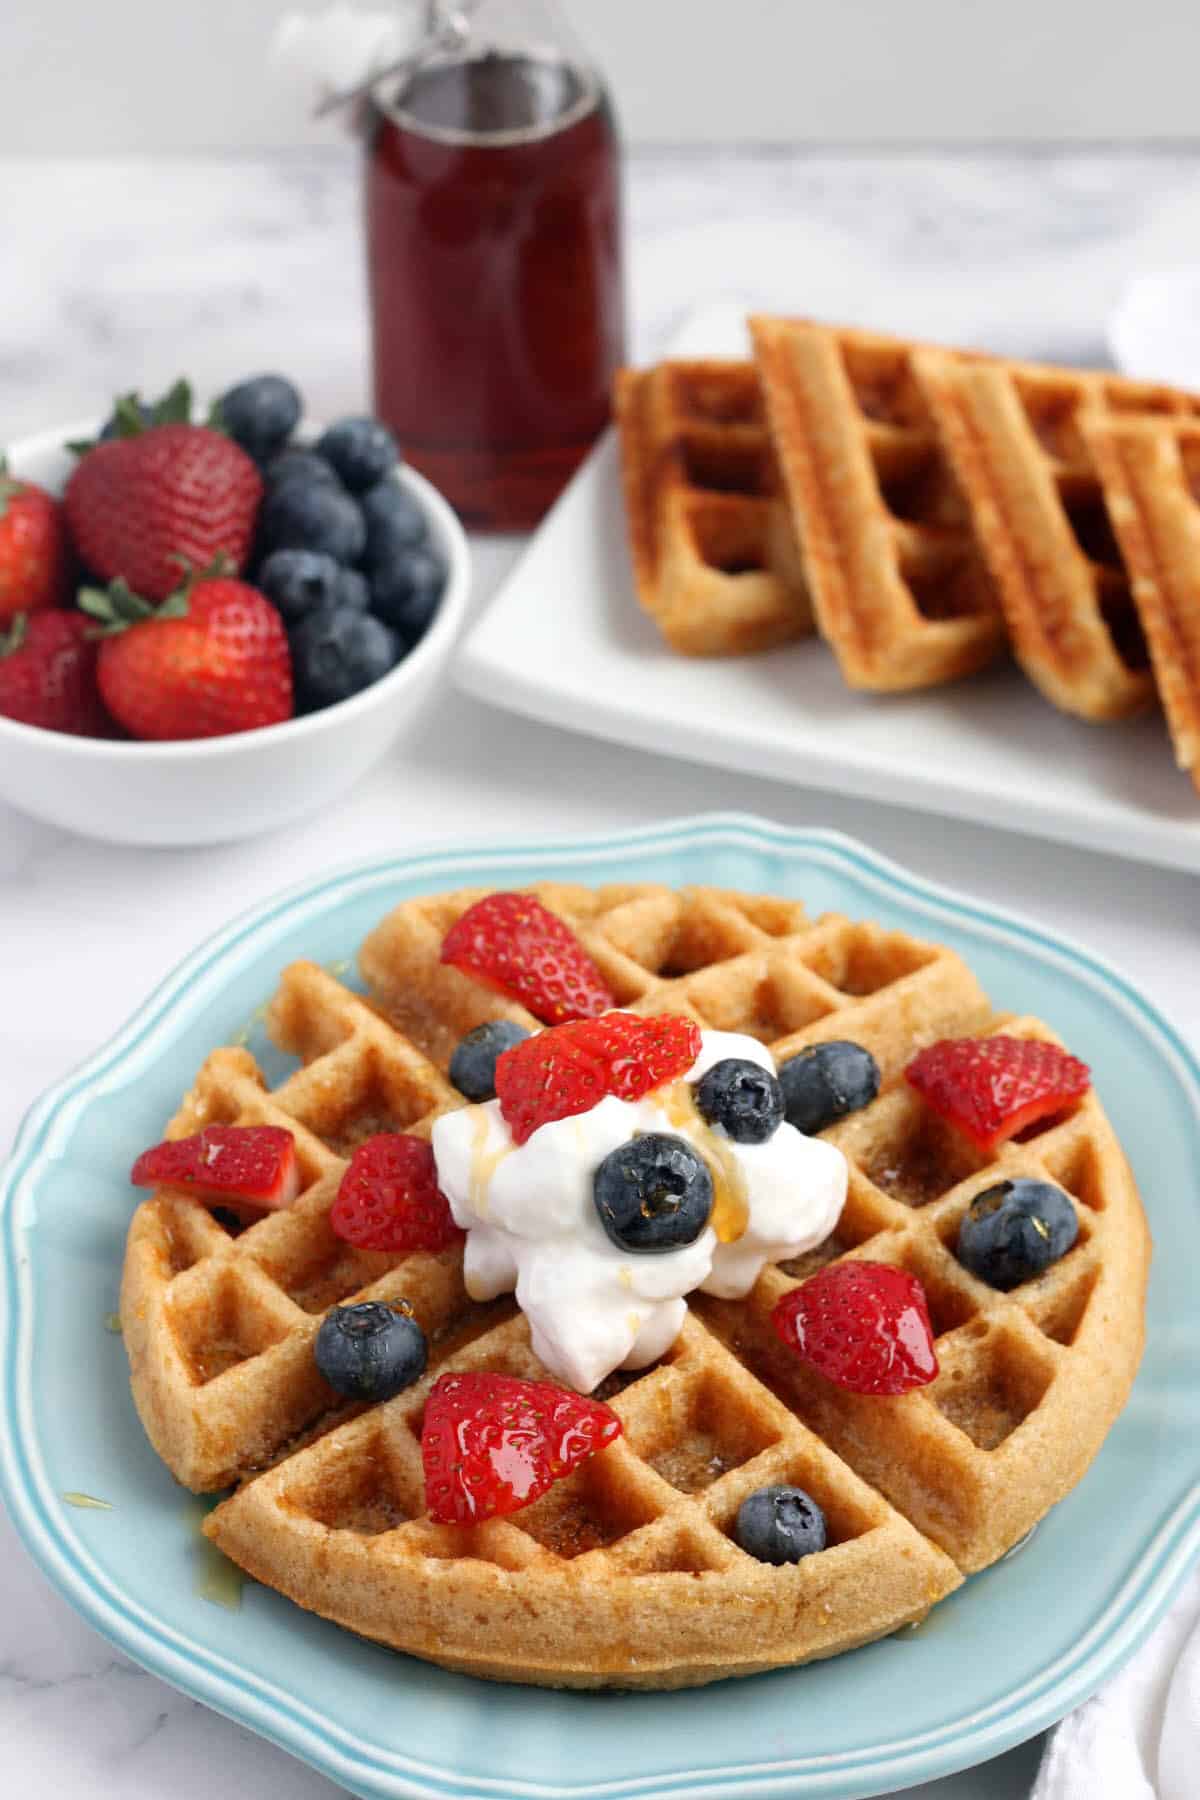 whole wheat waffles topped with whipped cream, fresh fruit and maple syrup